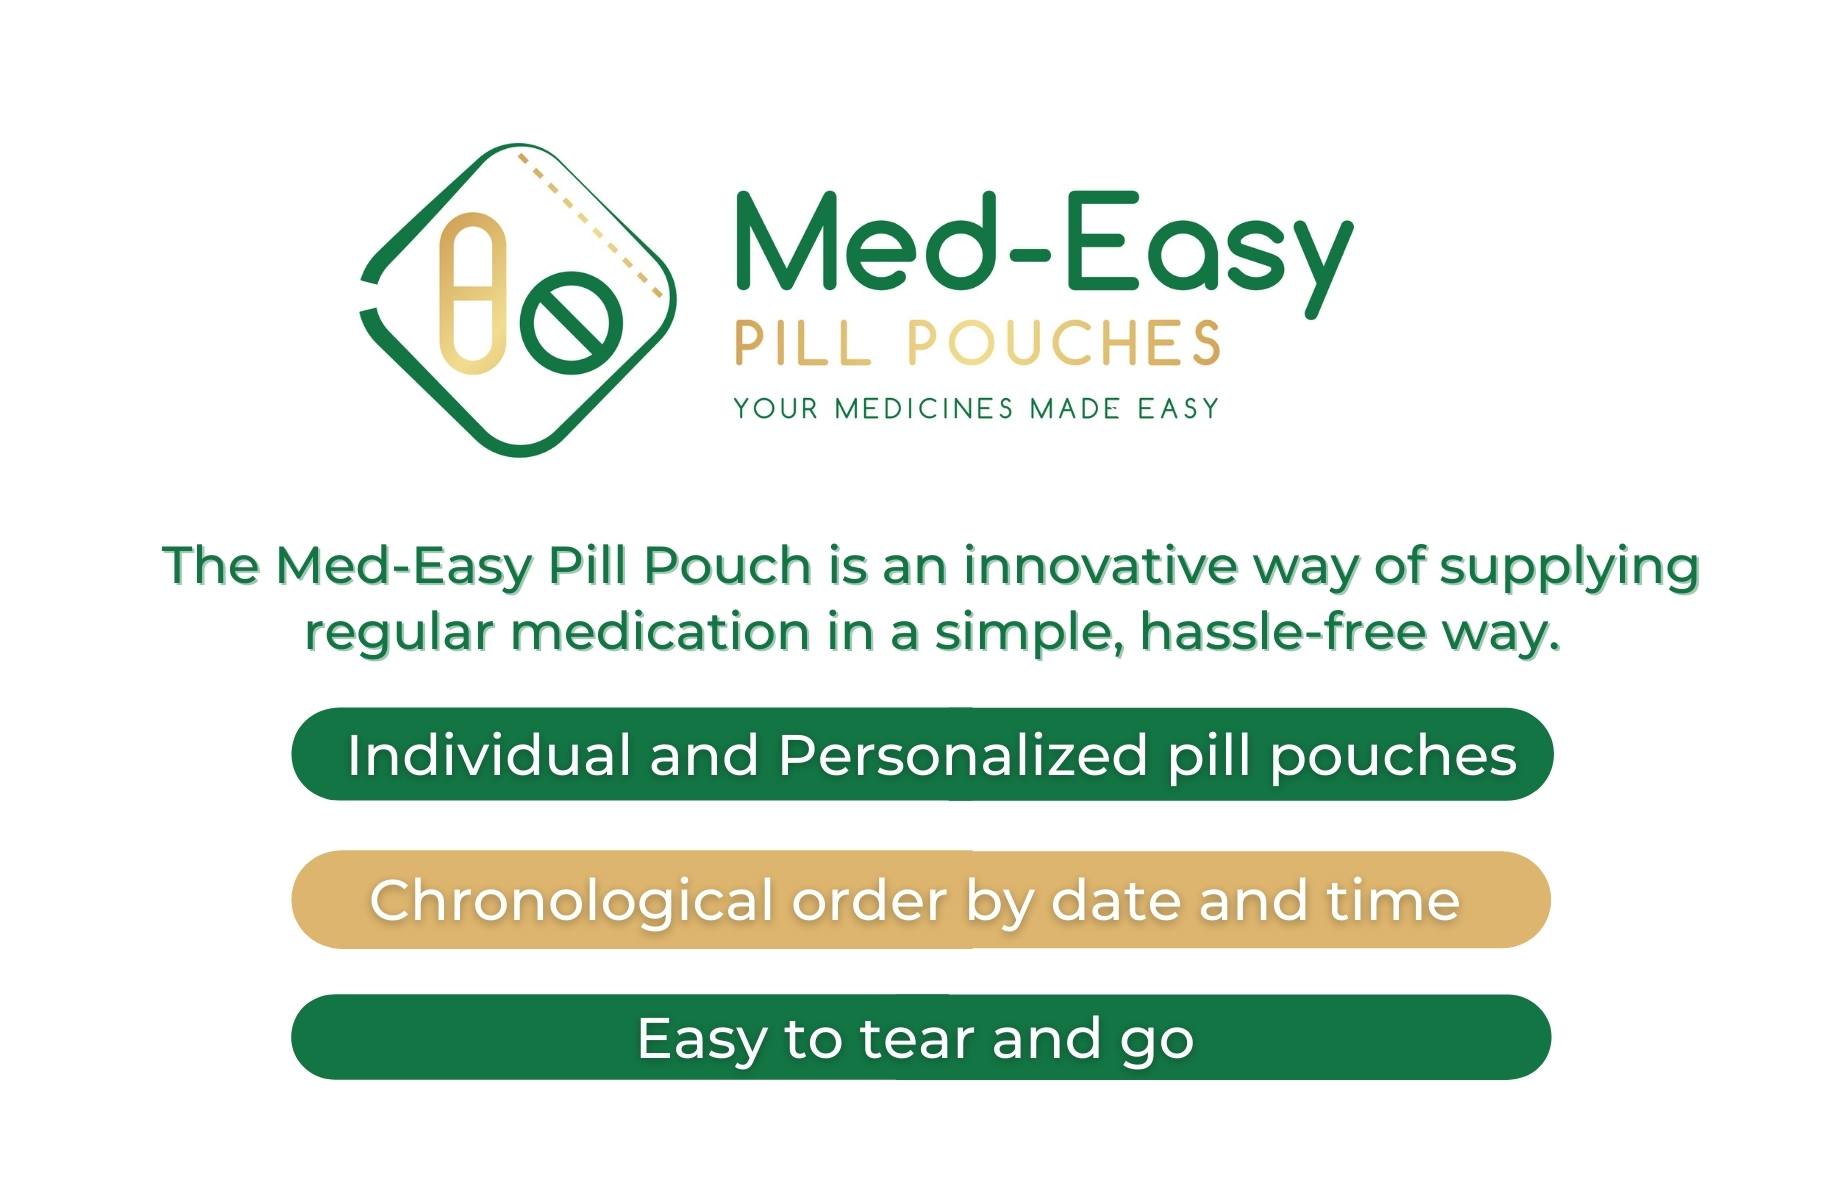 Med-Easy Pill Pouches